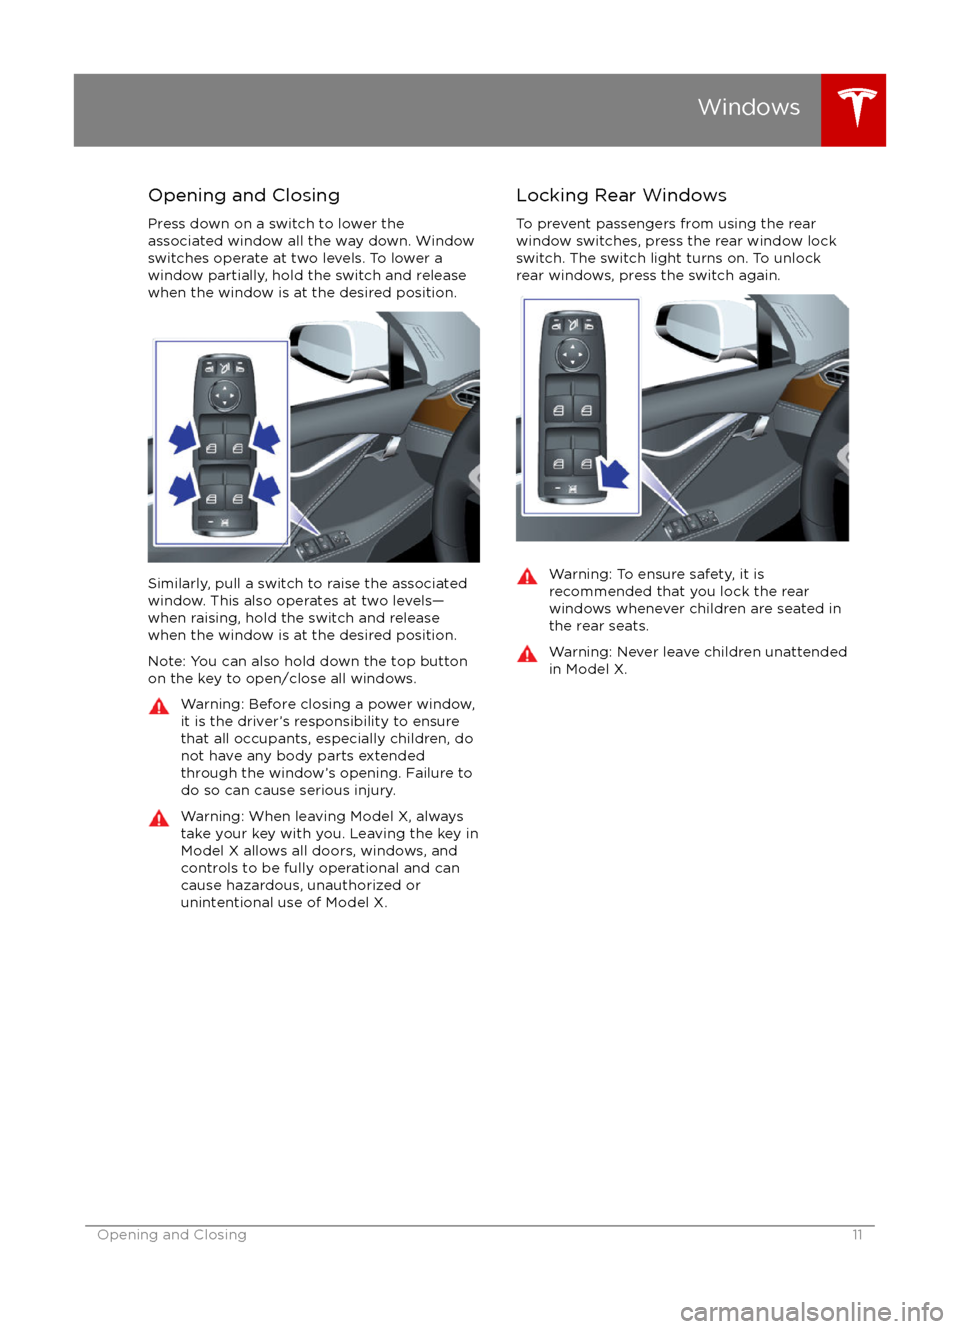 TESLA MODEL X 2016   Owners Manual Opening and Closing
Press down on a switch to lower the
associated window all the way down. Window
switches operate at two levels. To lower a
window partially, hold the switch and release
when the win